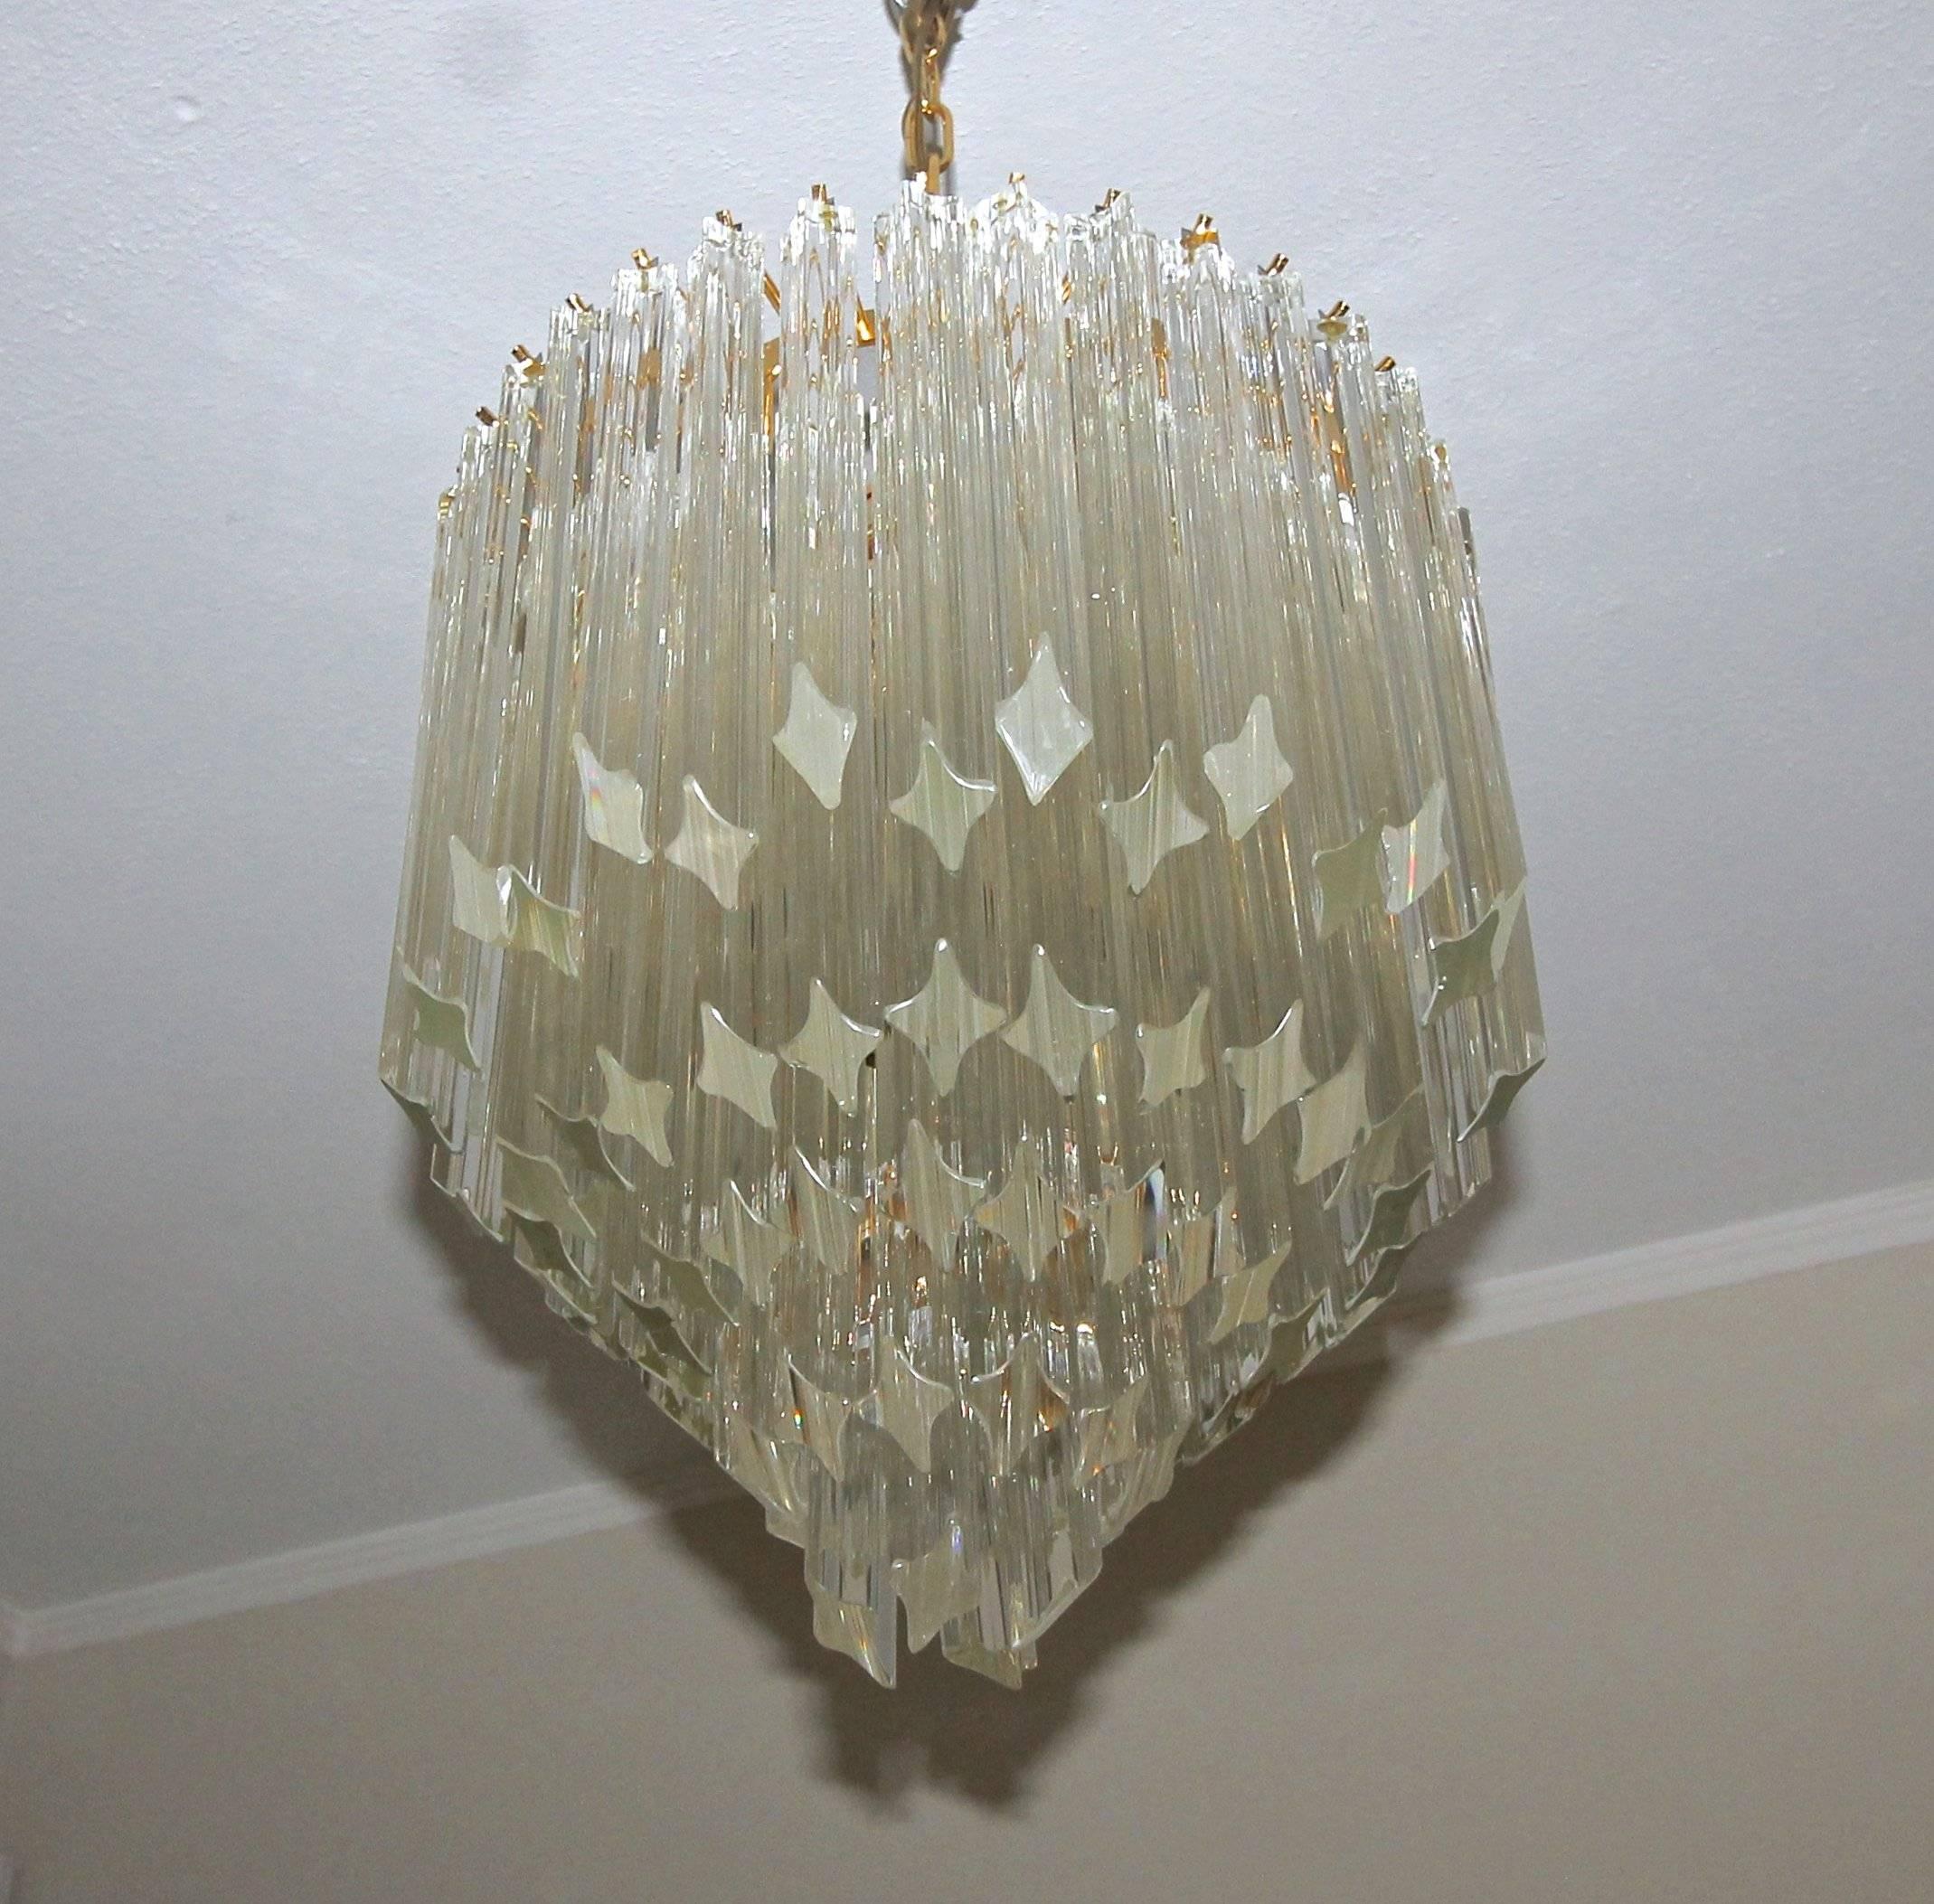 Round multi-tier triedri glass chandelier with clear glass crystal prisms and brass-plated steel frame. Great vintage Italian Murano design in the manner of Venini and manufactured by Camer glass. Newly wired for US, fixture uses six candelabra base